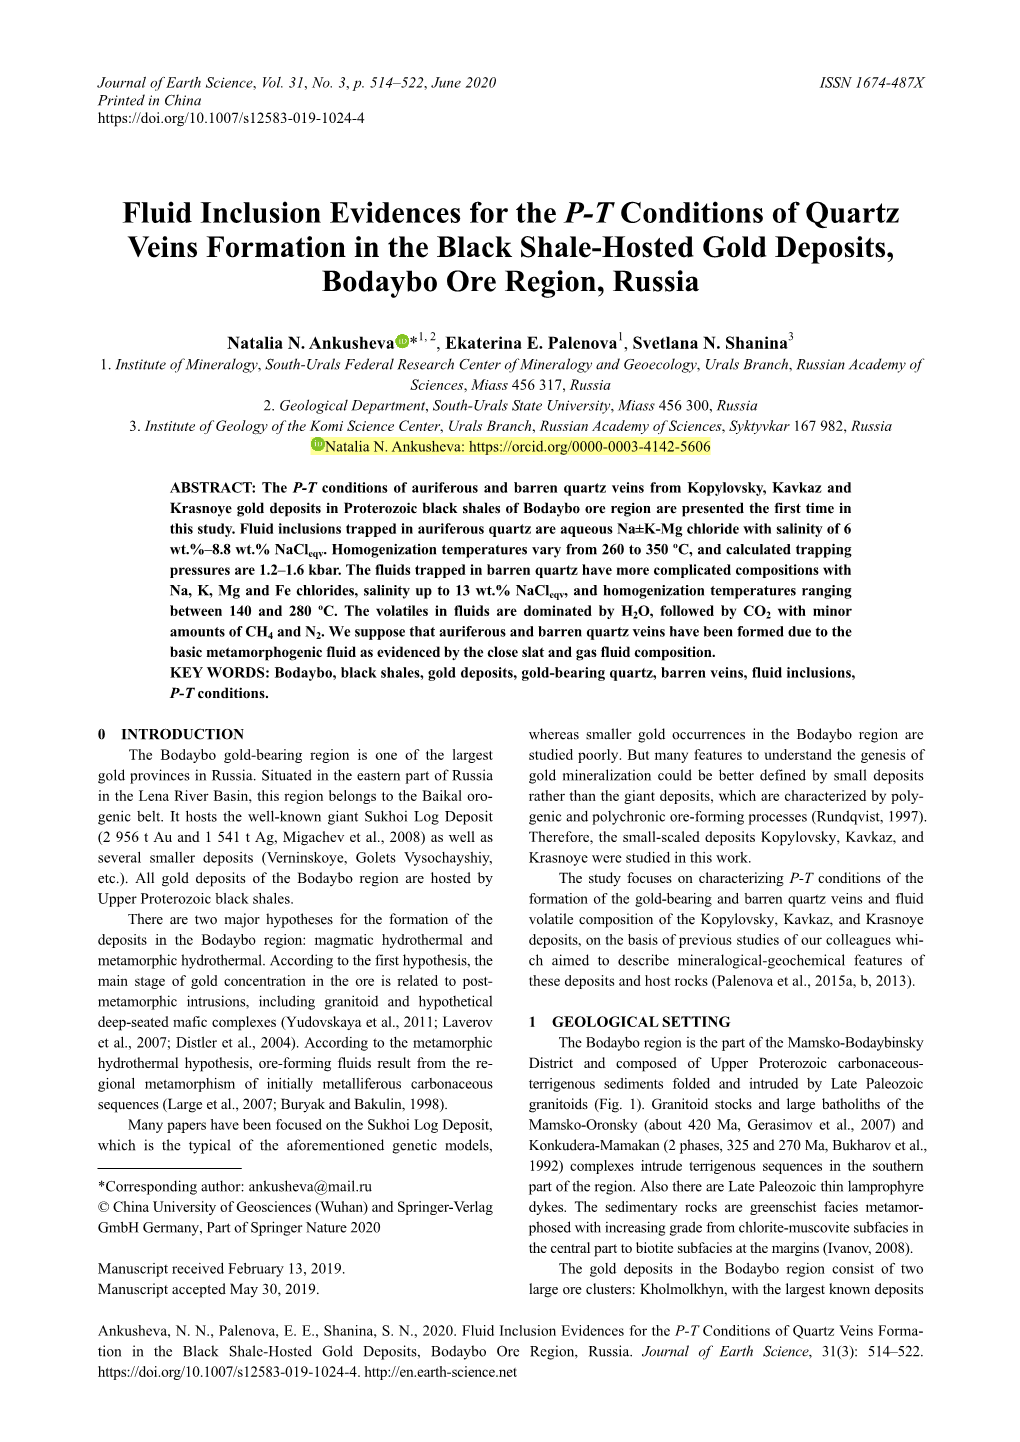 Fluid Inclusion Evidences for the P-T Conditions of Quartz Veins Formation in the Black Shale-Hosted Gold Deposits, Bodaybo Ore Region, Russia